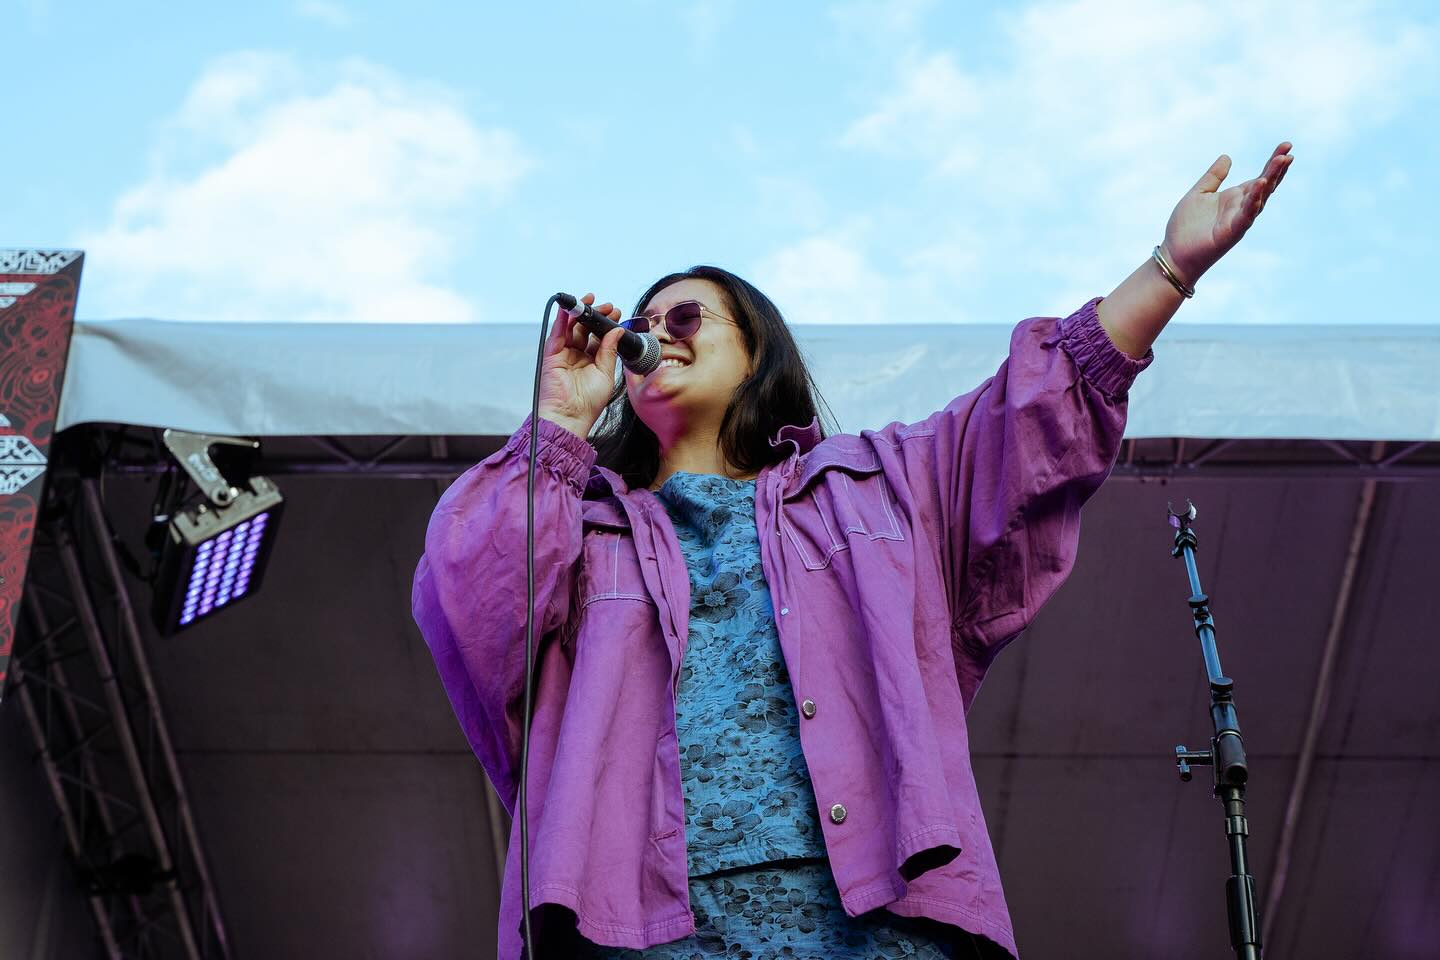 Jordyn with a Why performing at the CubaDupa festival in Pōneke Wellington last month. Photo/Facebook